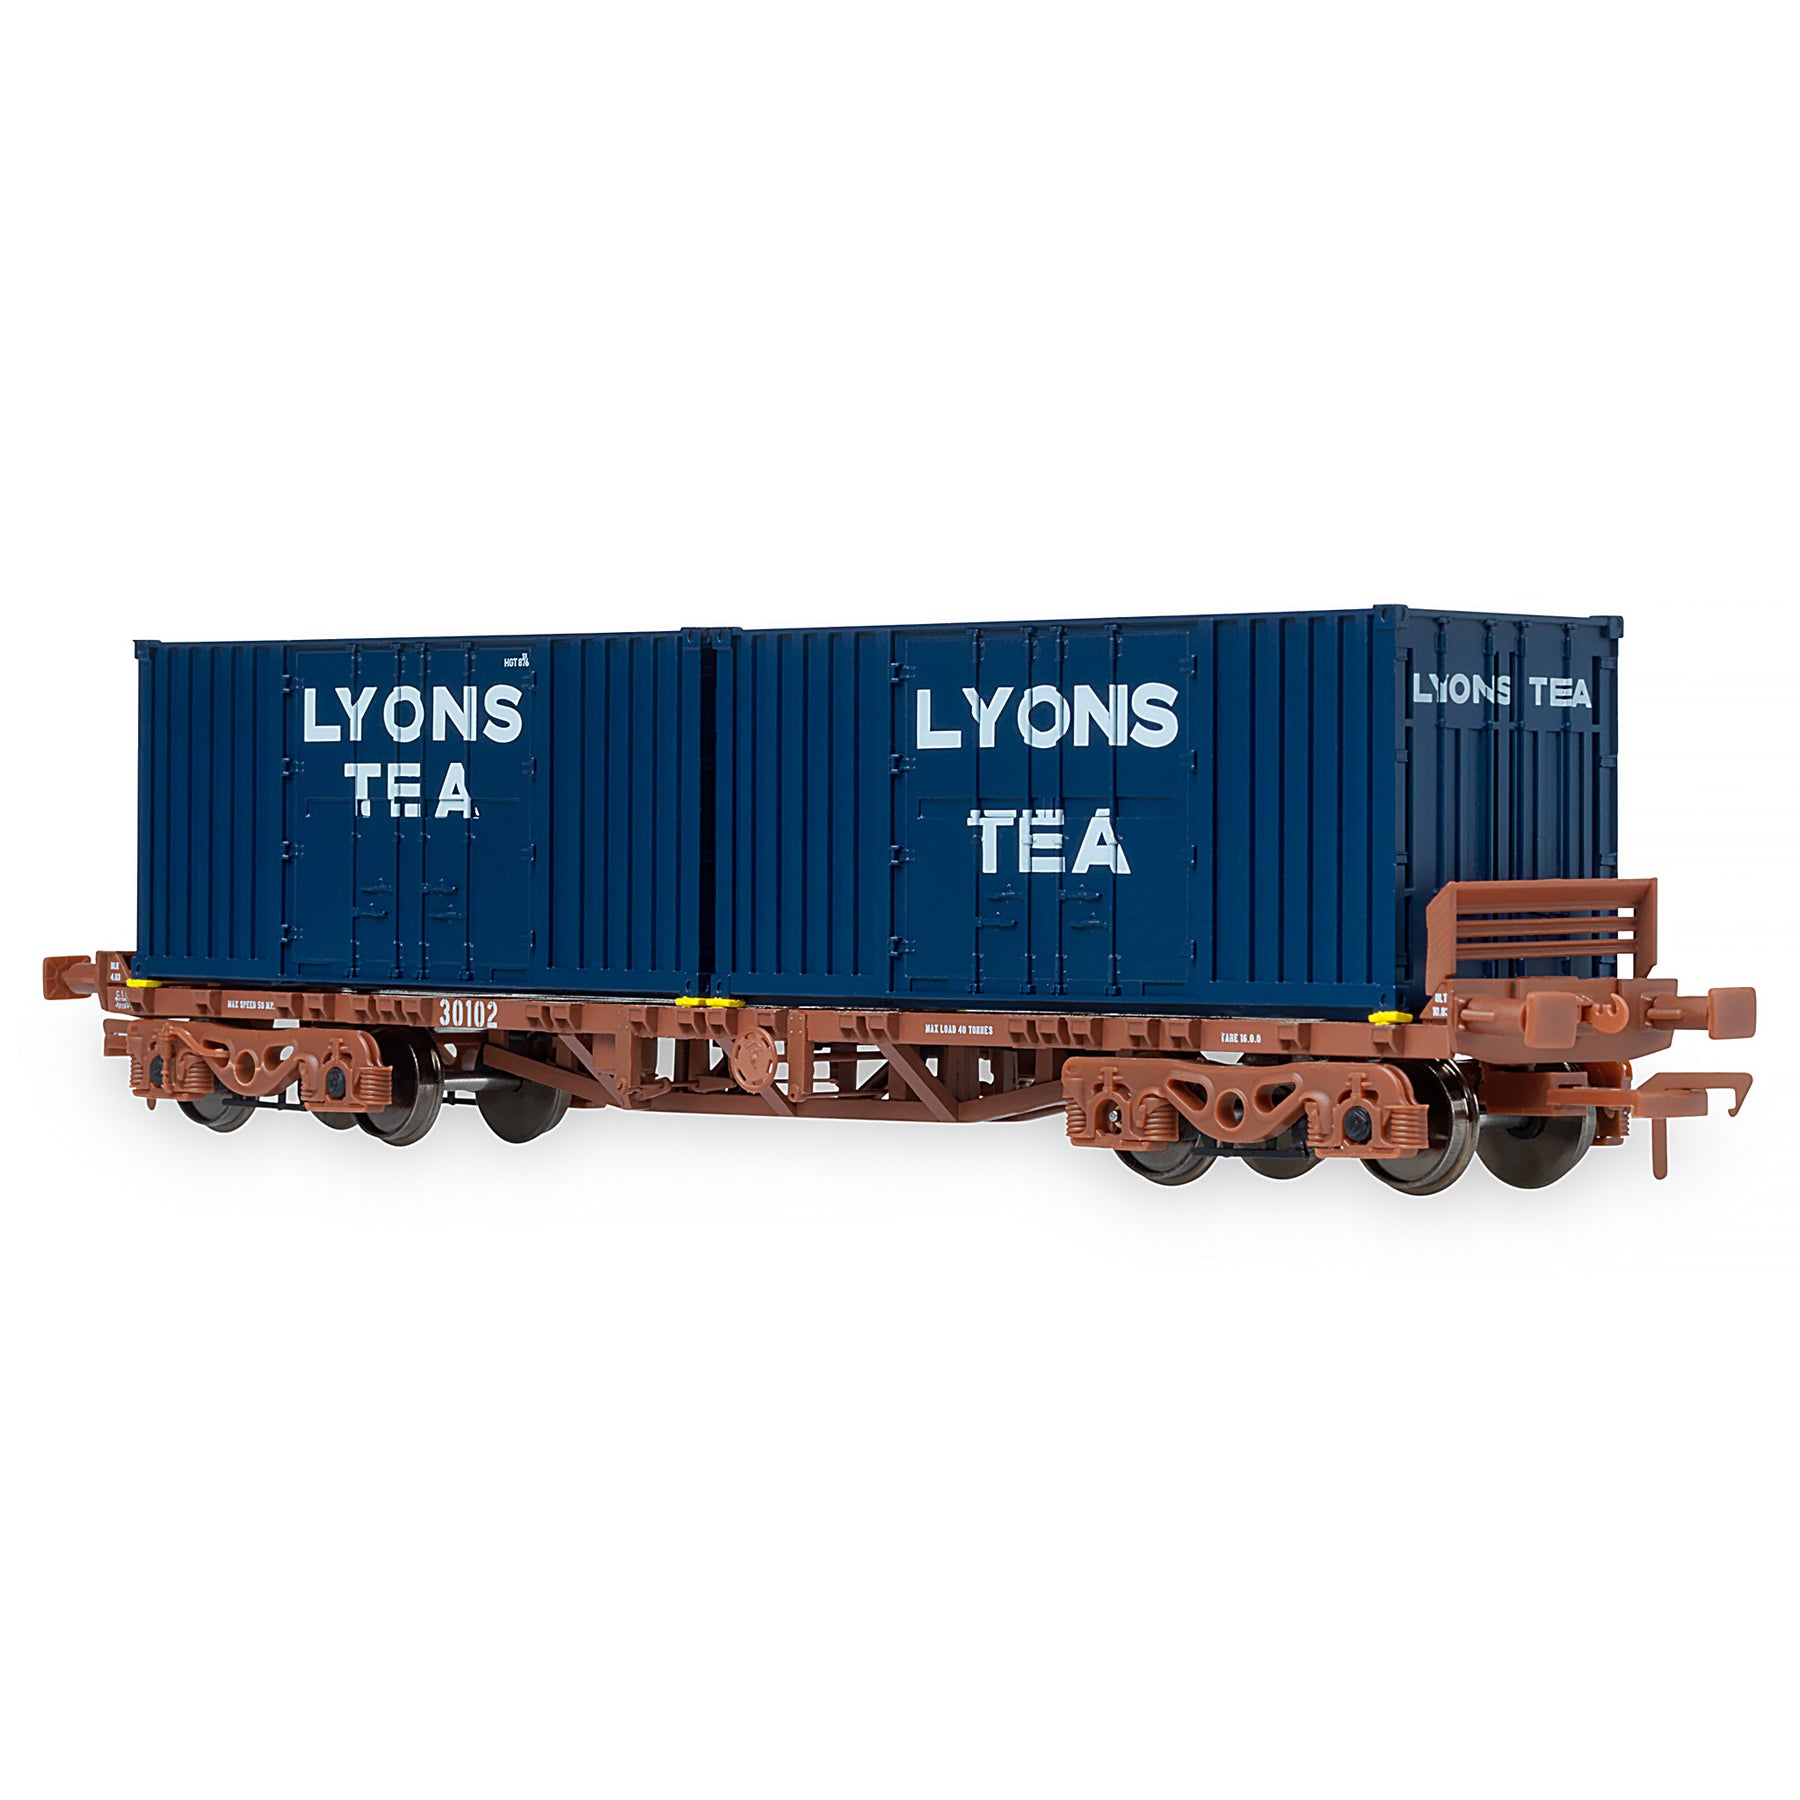 Quali-tea Liners - Our Container Flats Are Back With New Liveries